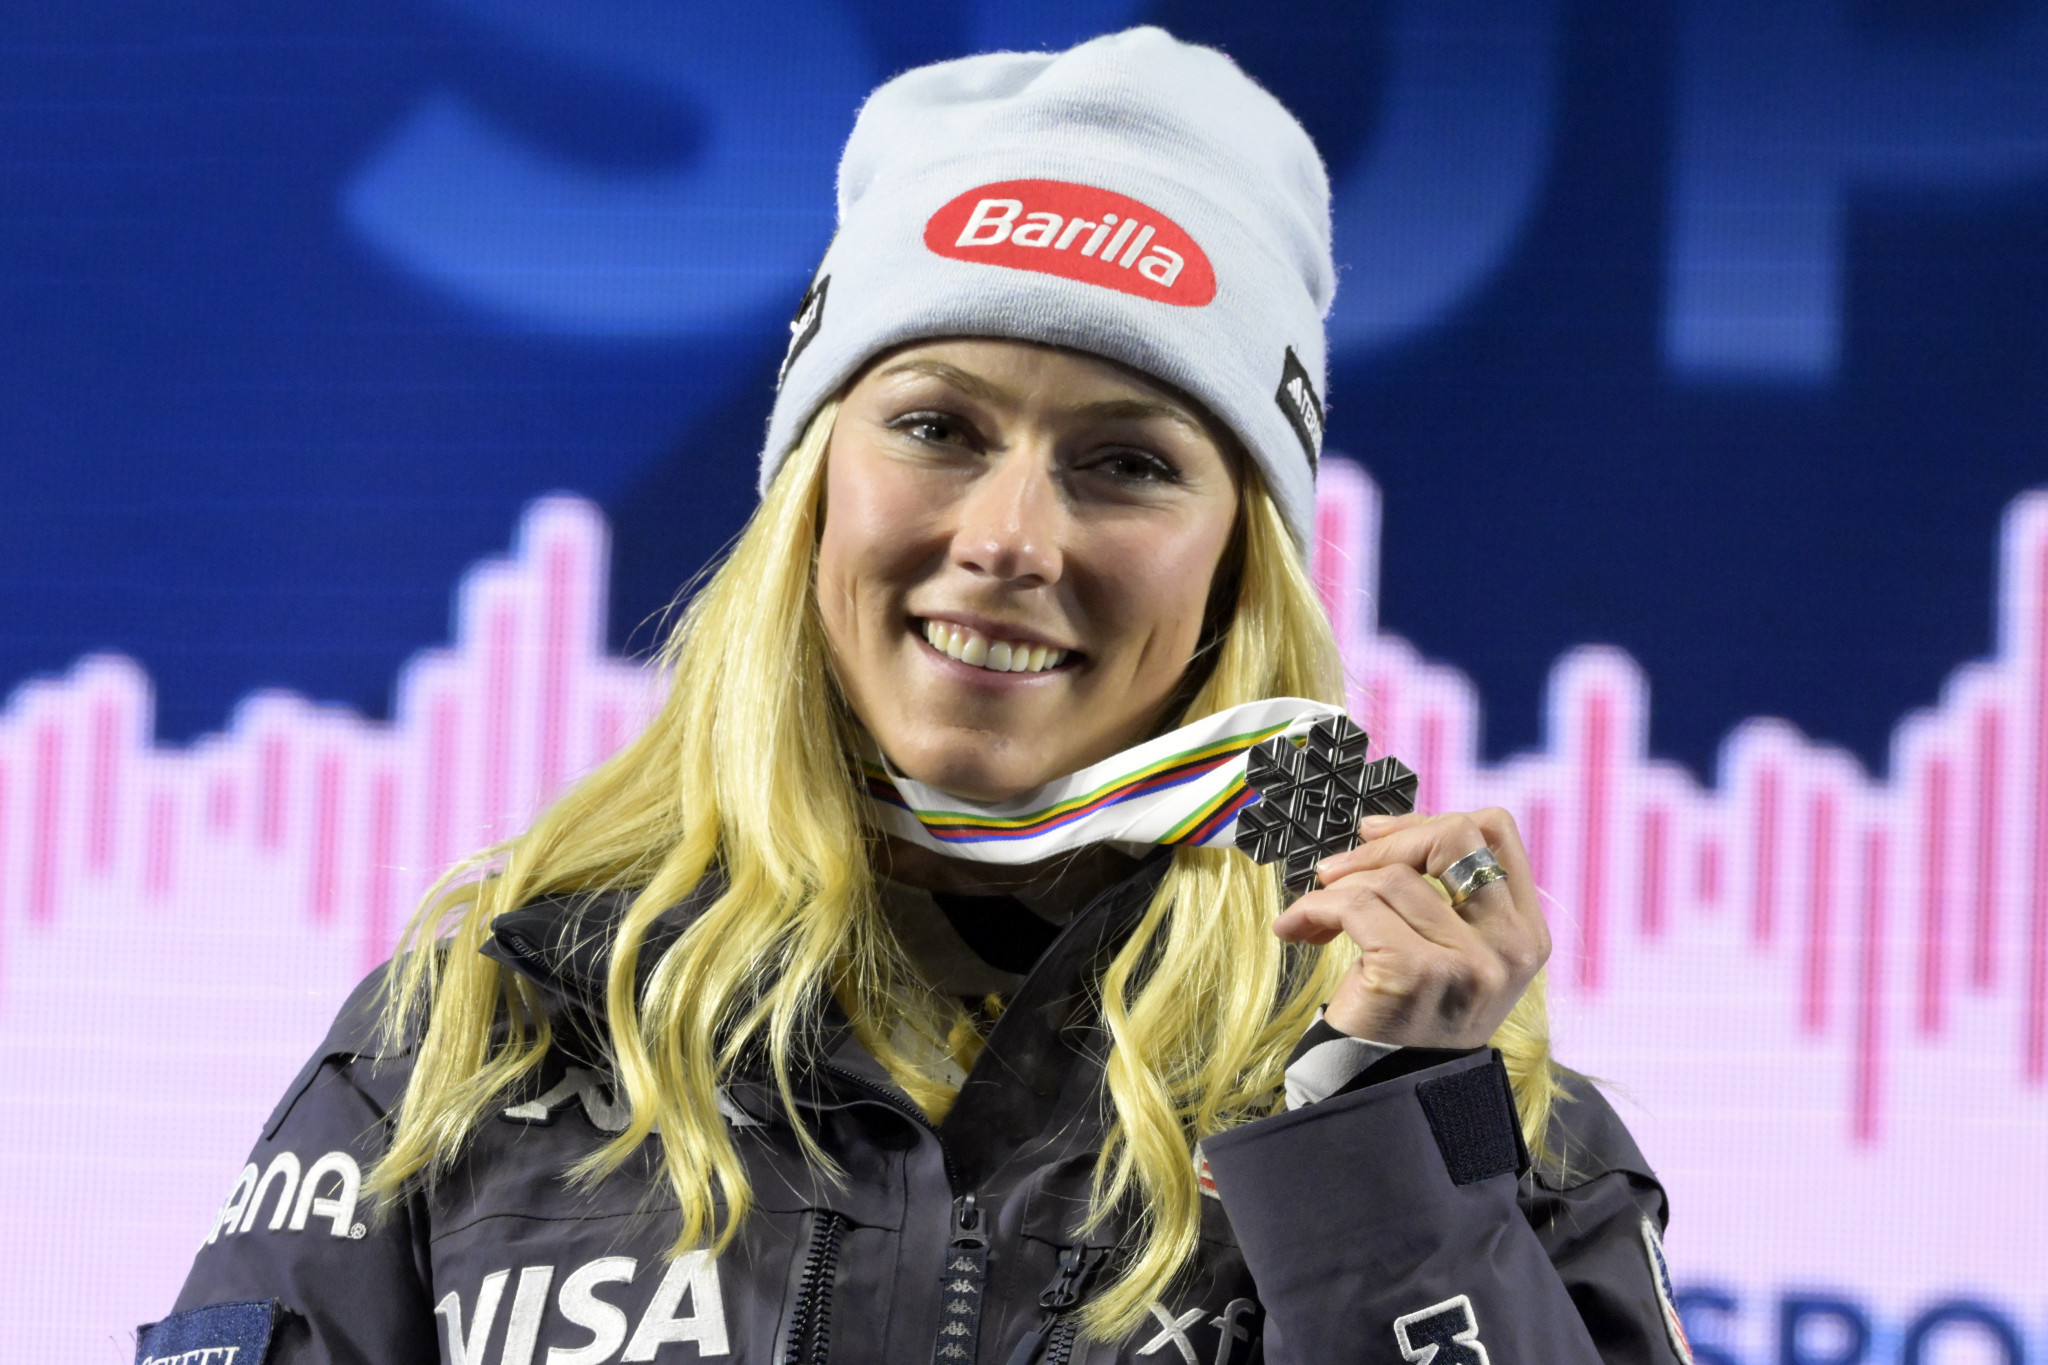 Shiffrin splits with long-time coach Day at FIS World Championships